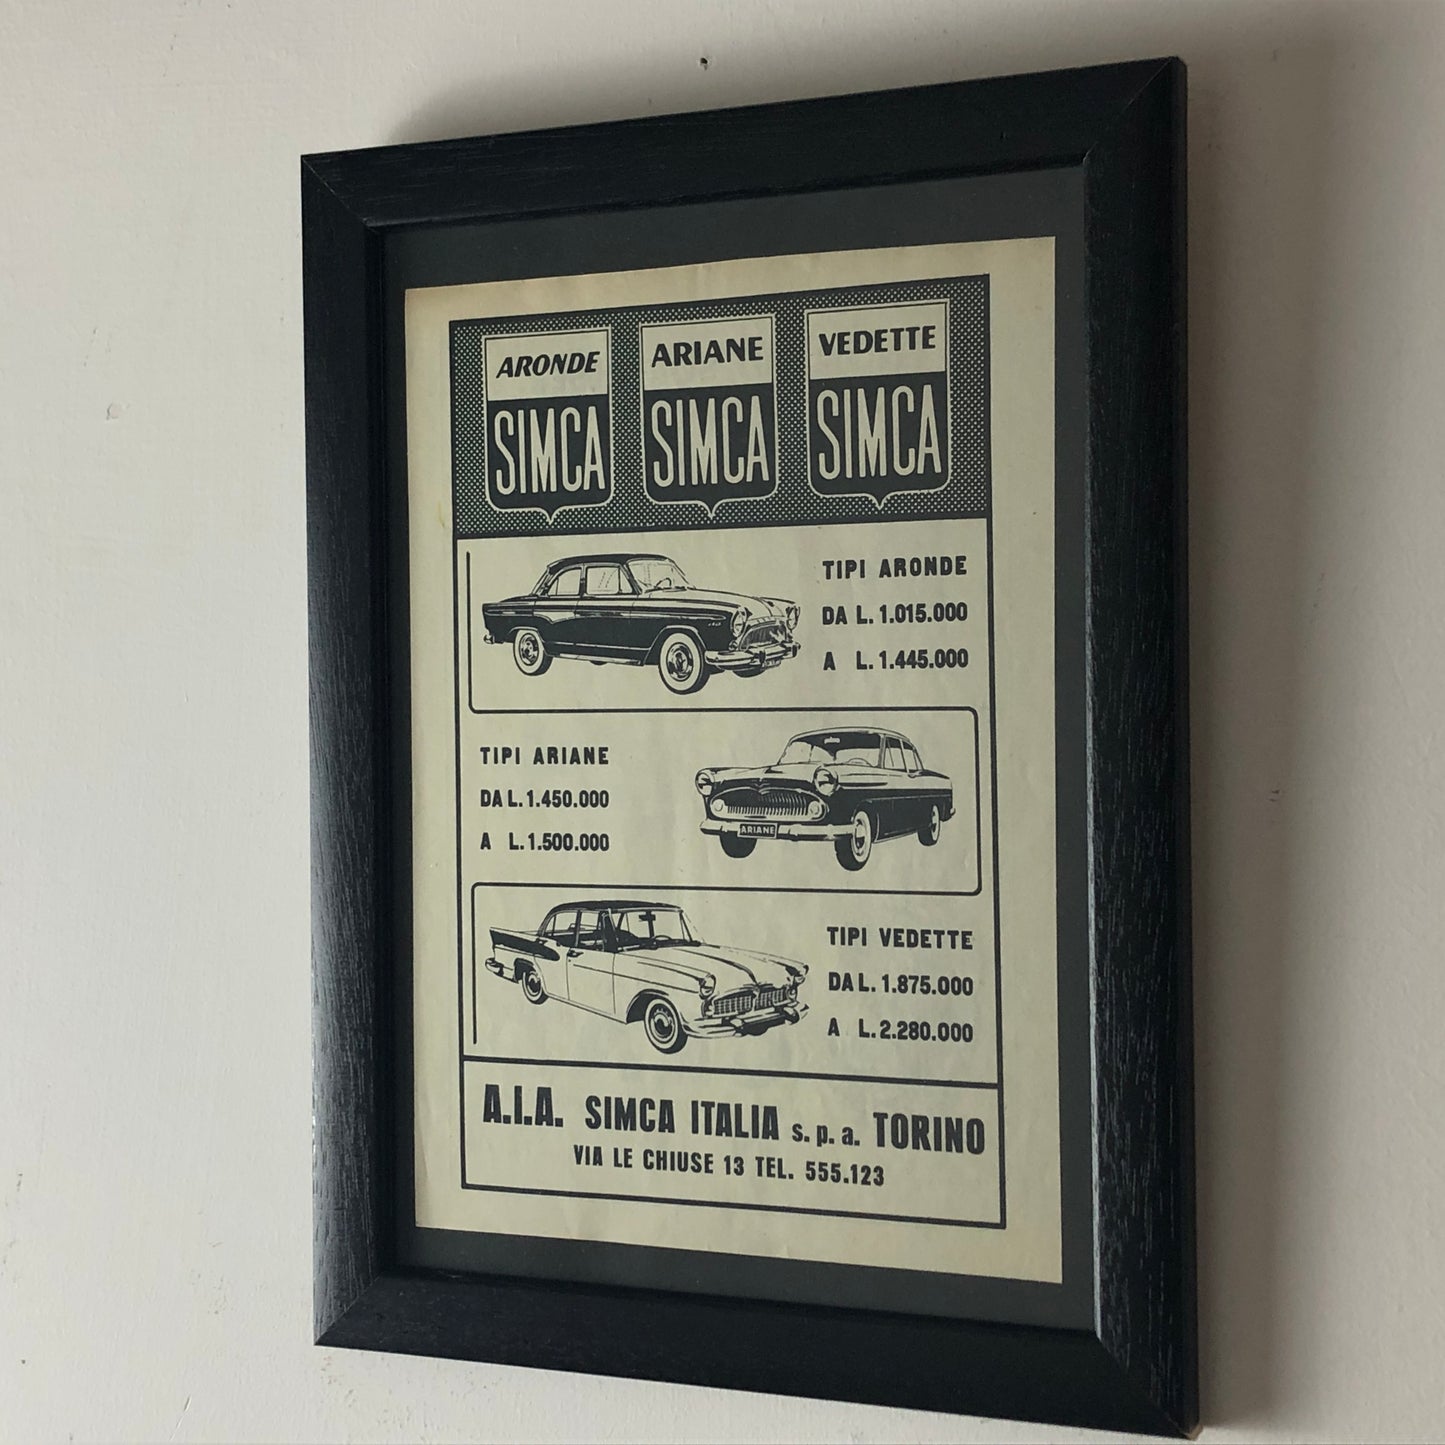 SIMCA, Advertising Year 1960 SIMCA Aronde, Ariane, Vedette with Price List